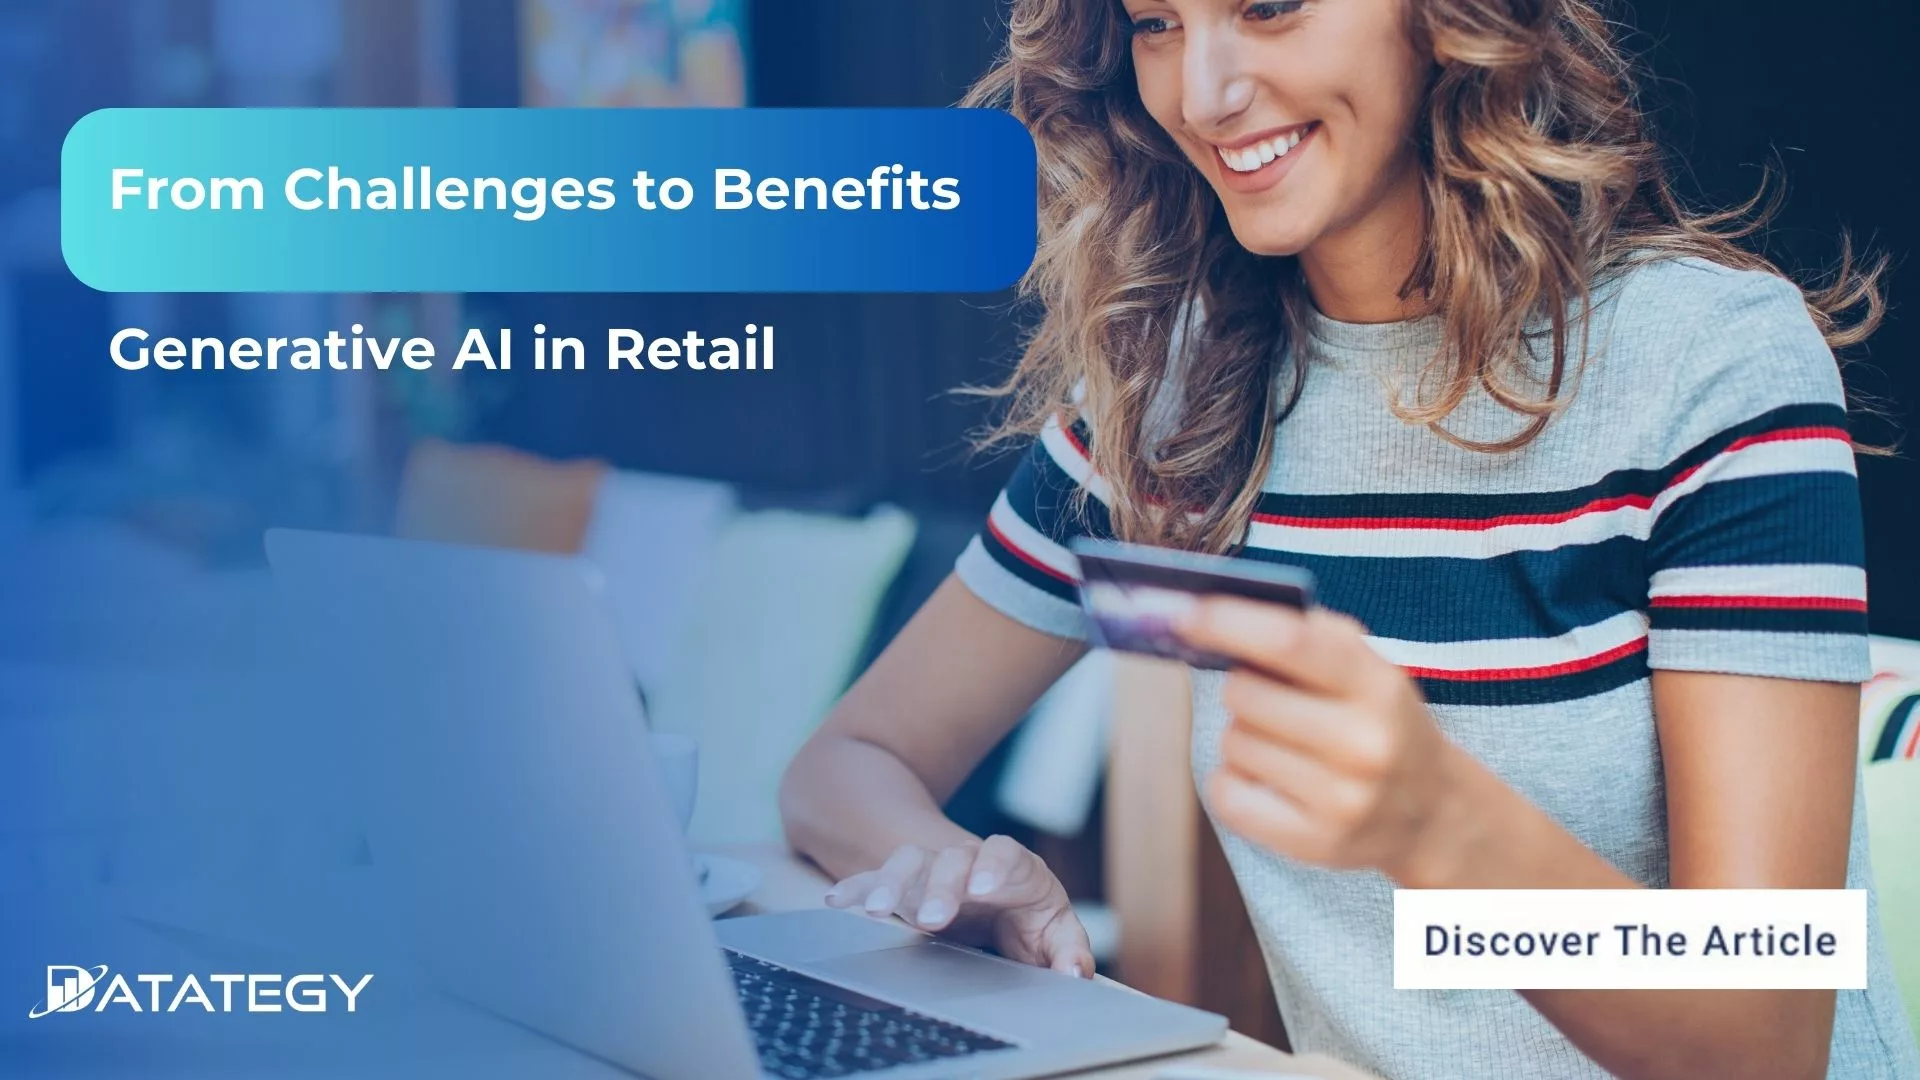 From Challenges to Benefits: Generative AI in Retail